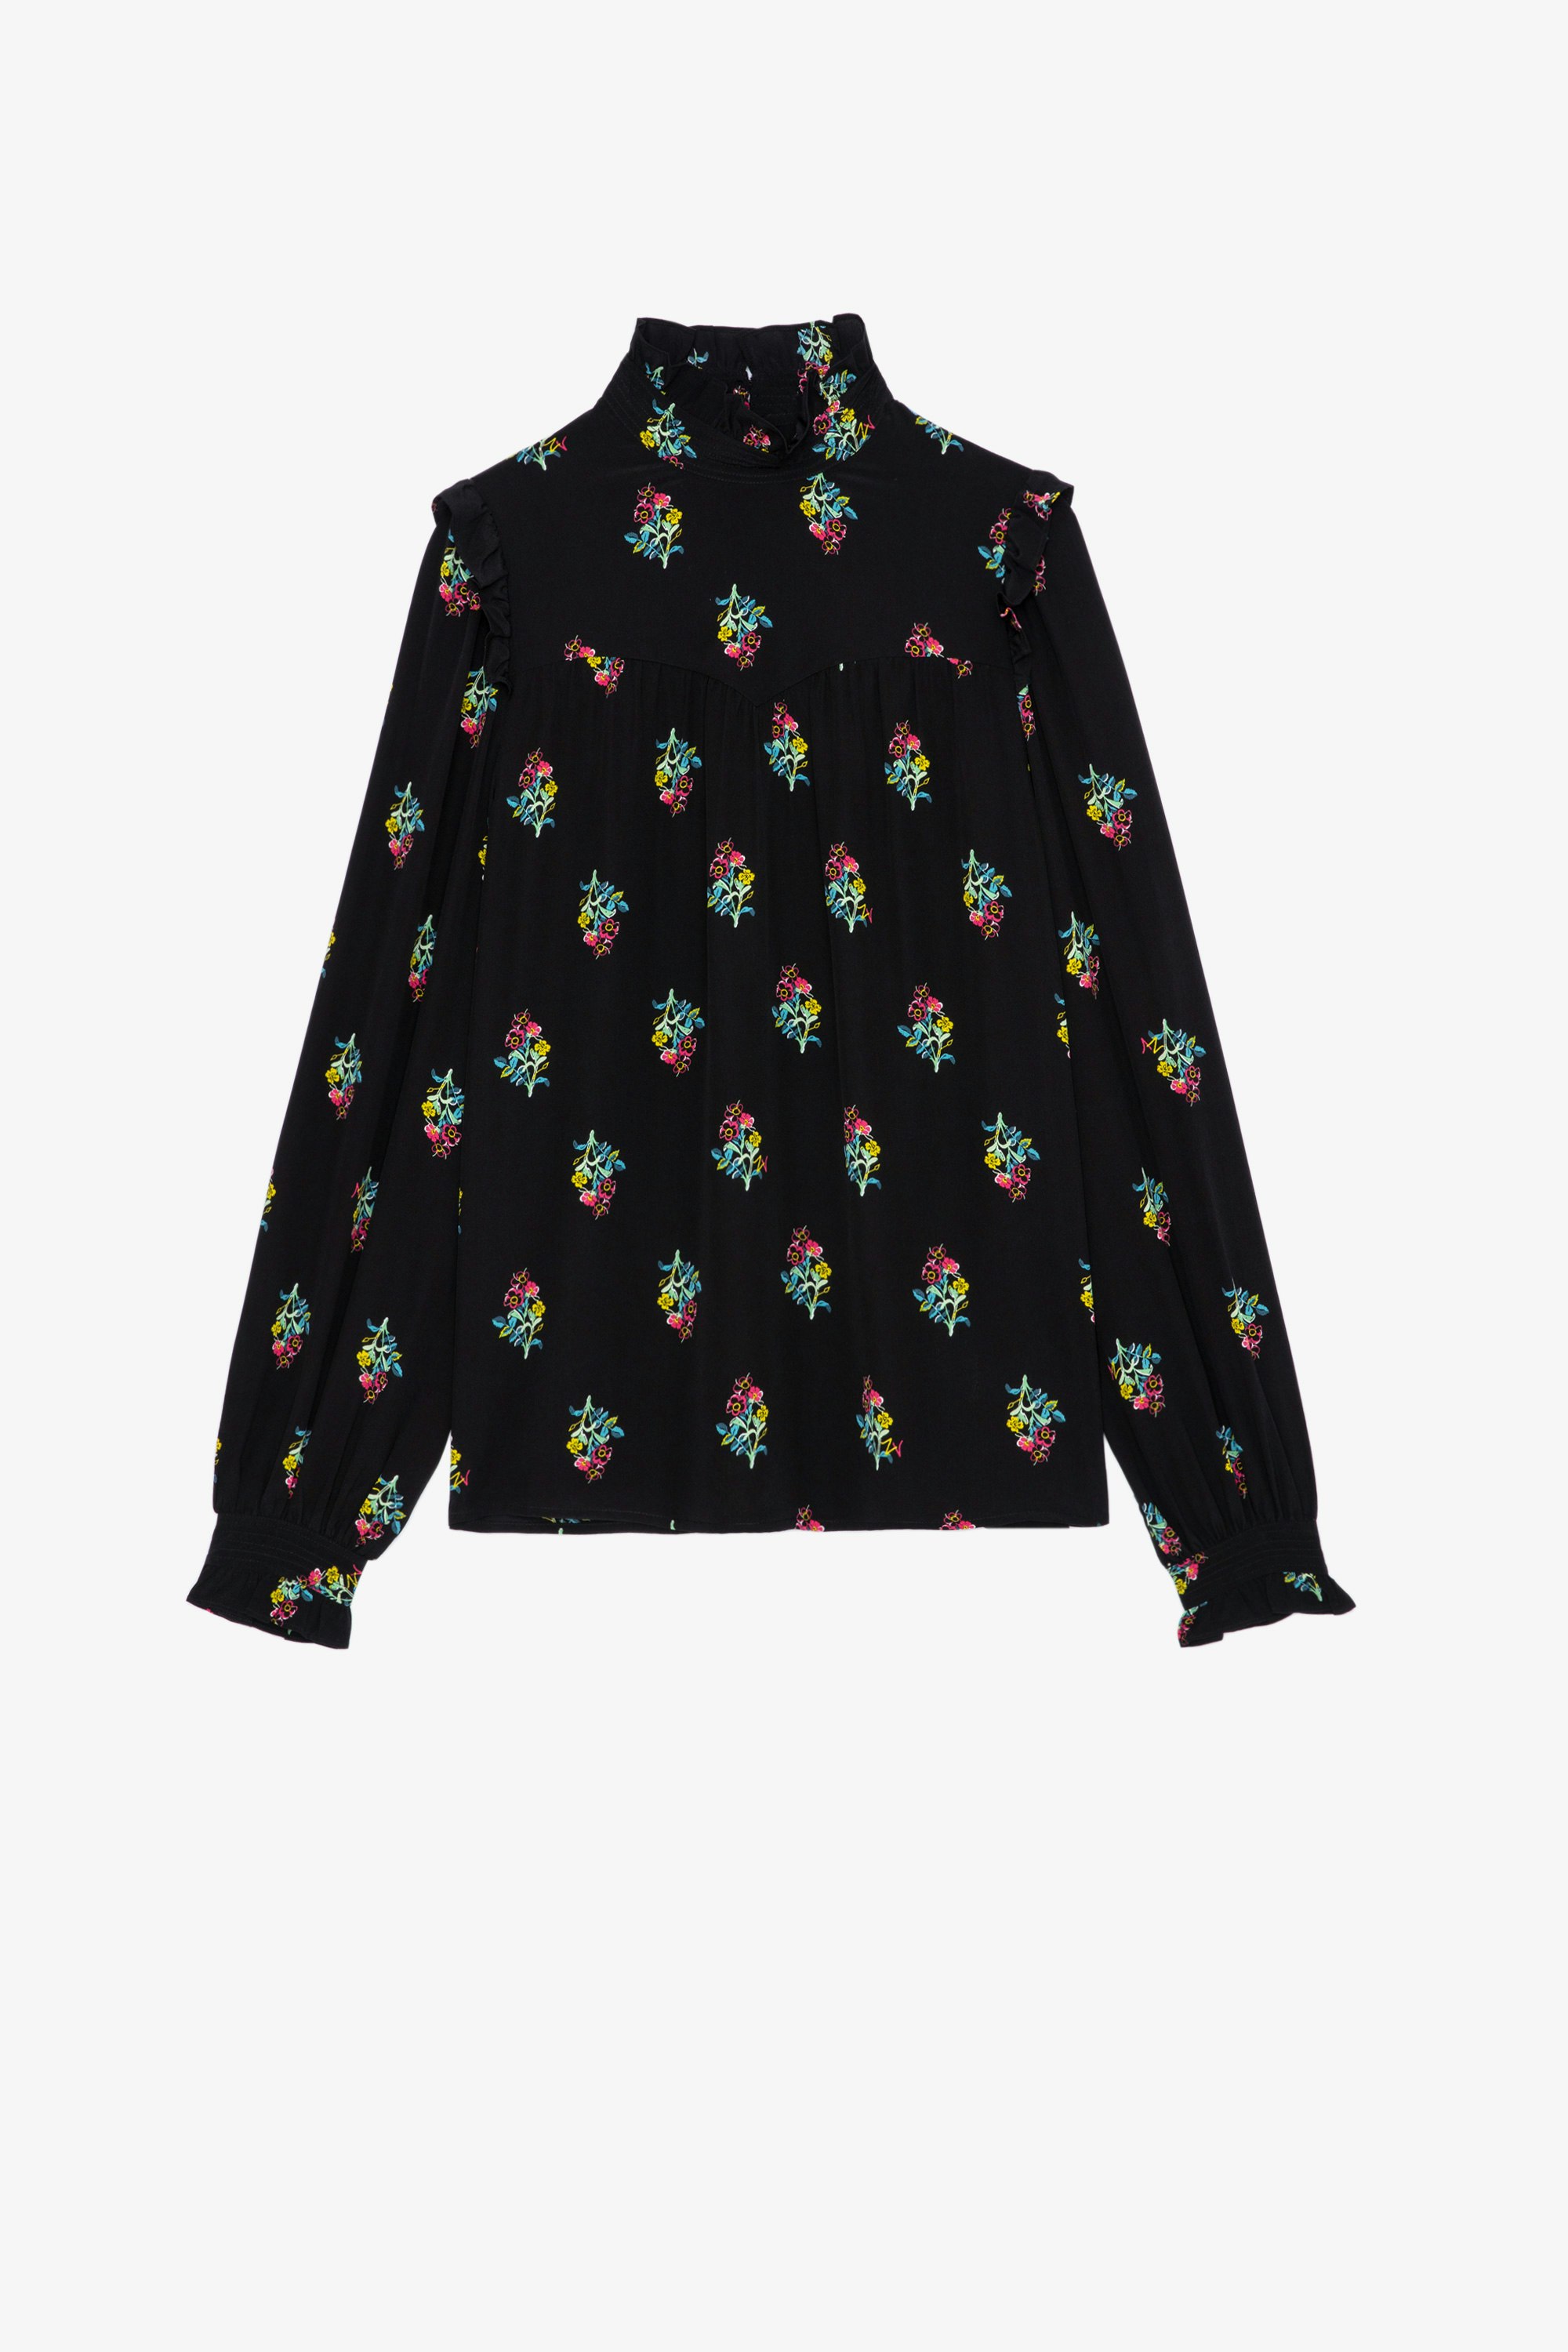 Tia Polka Flowers シルク シャツ Women’s black silk shirt with buttoned collar and multicoloured floral motifs 